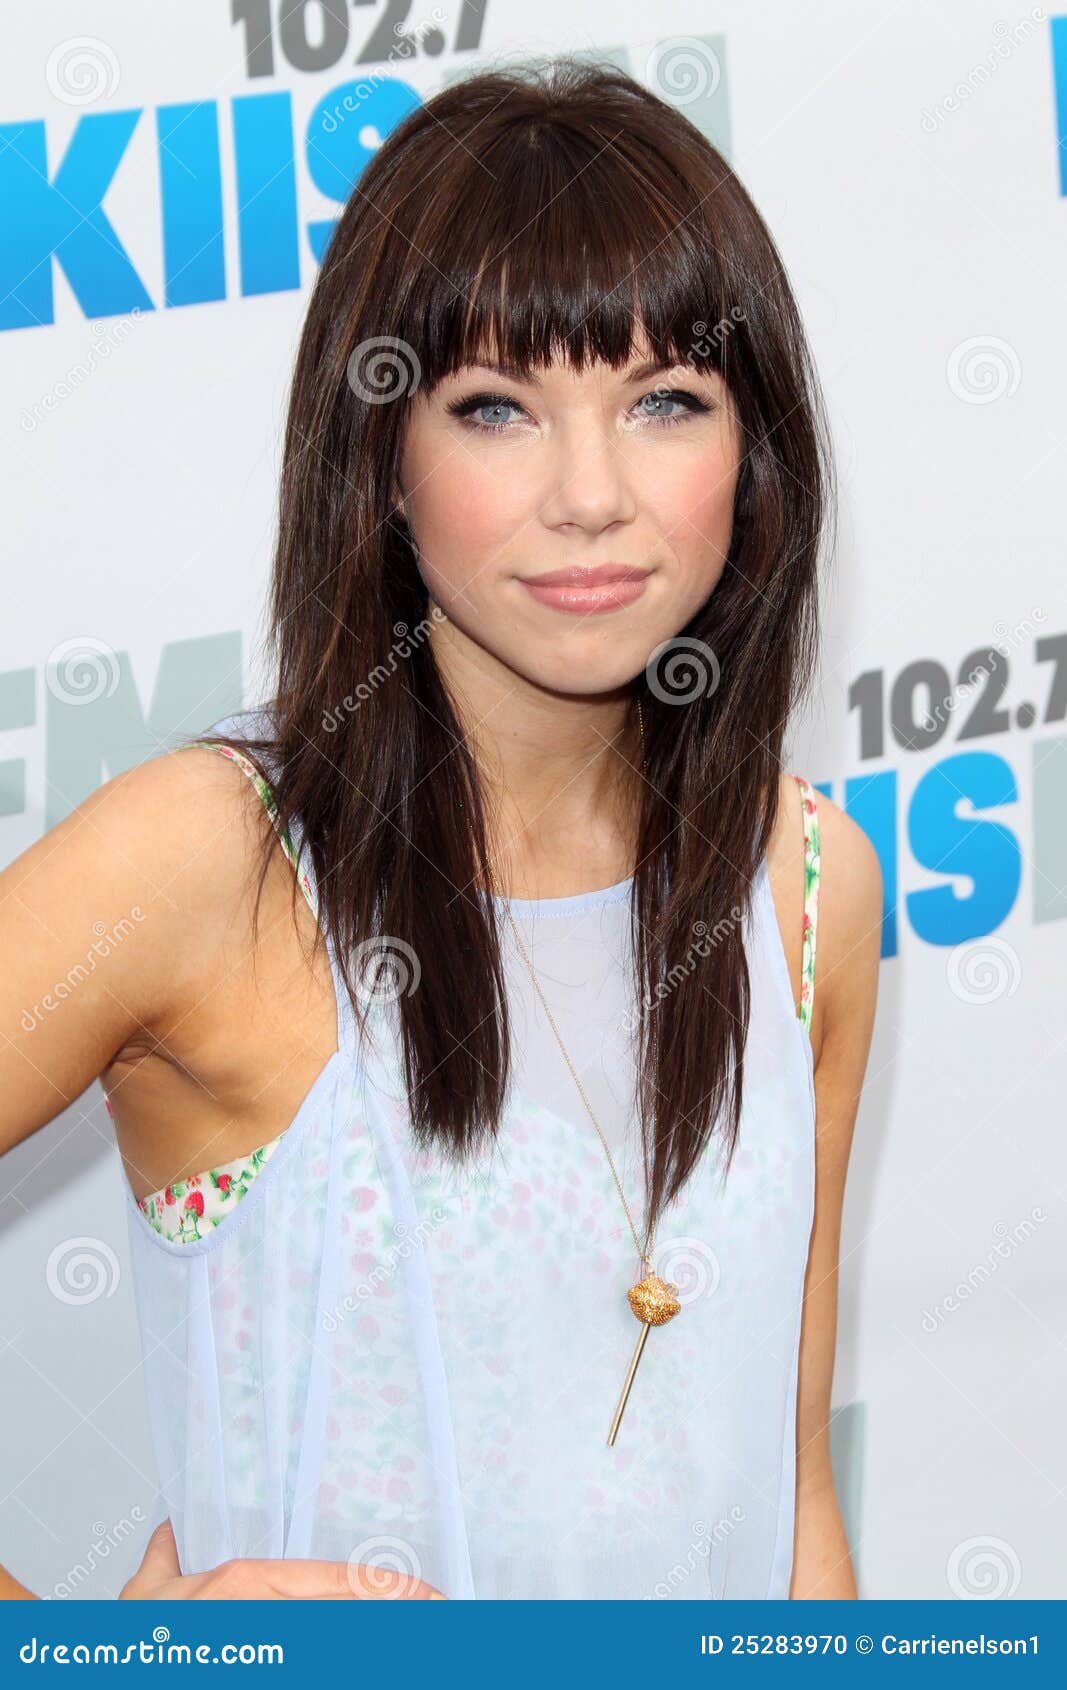 12 Carly Rae Jepsen Hairstyles, Hair Cuts and Colors